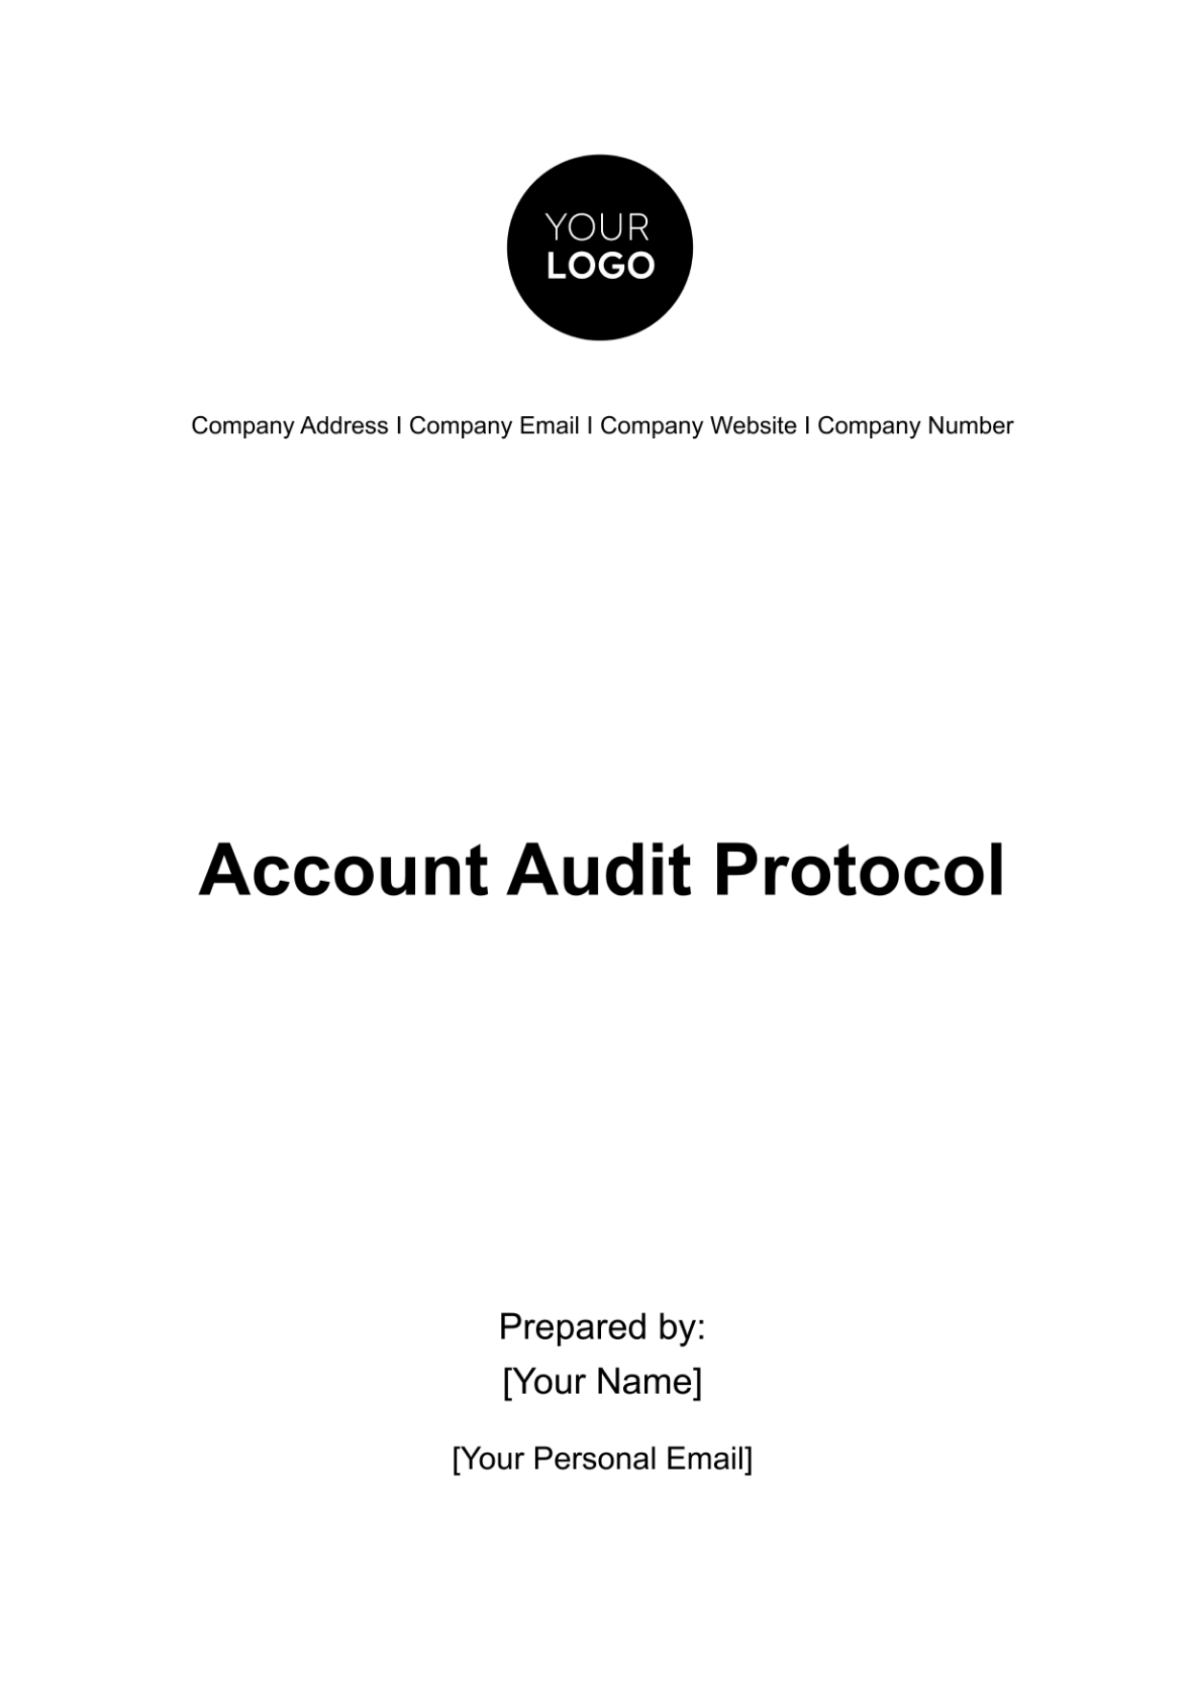 Account Audit Protocol Template